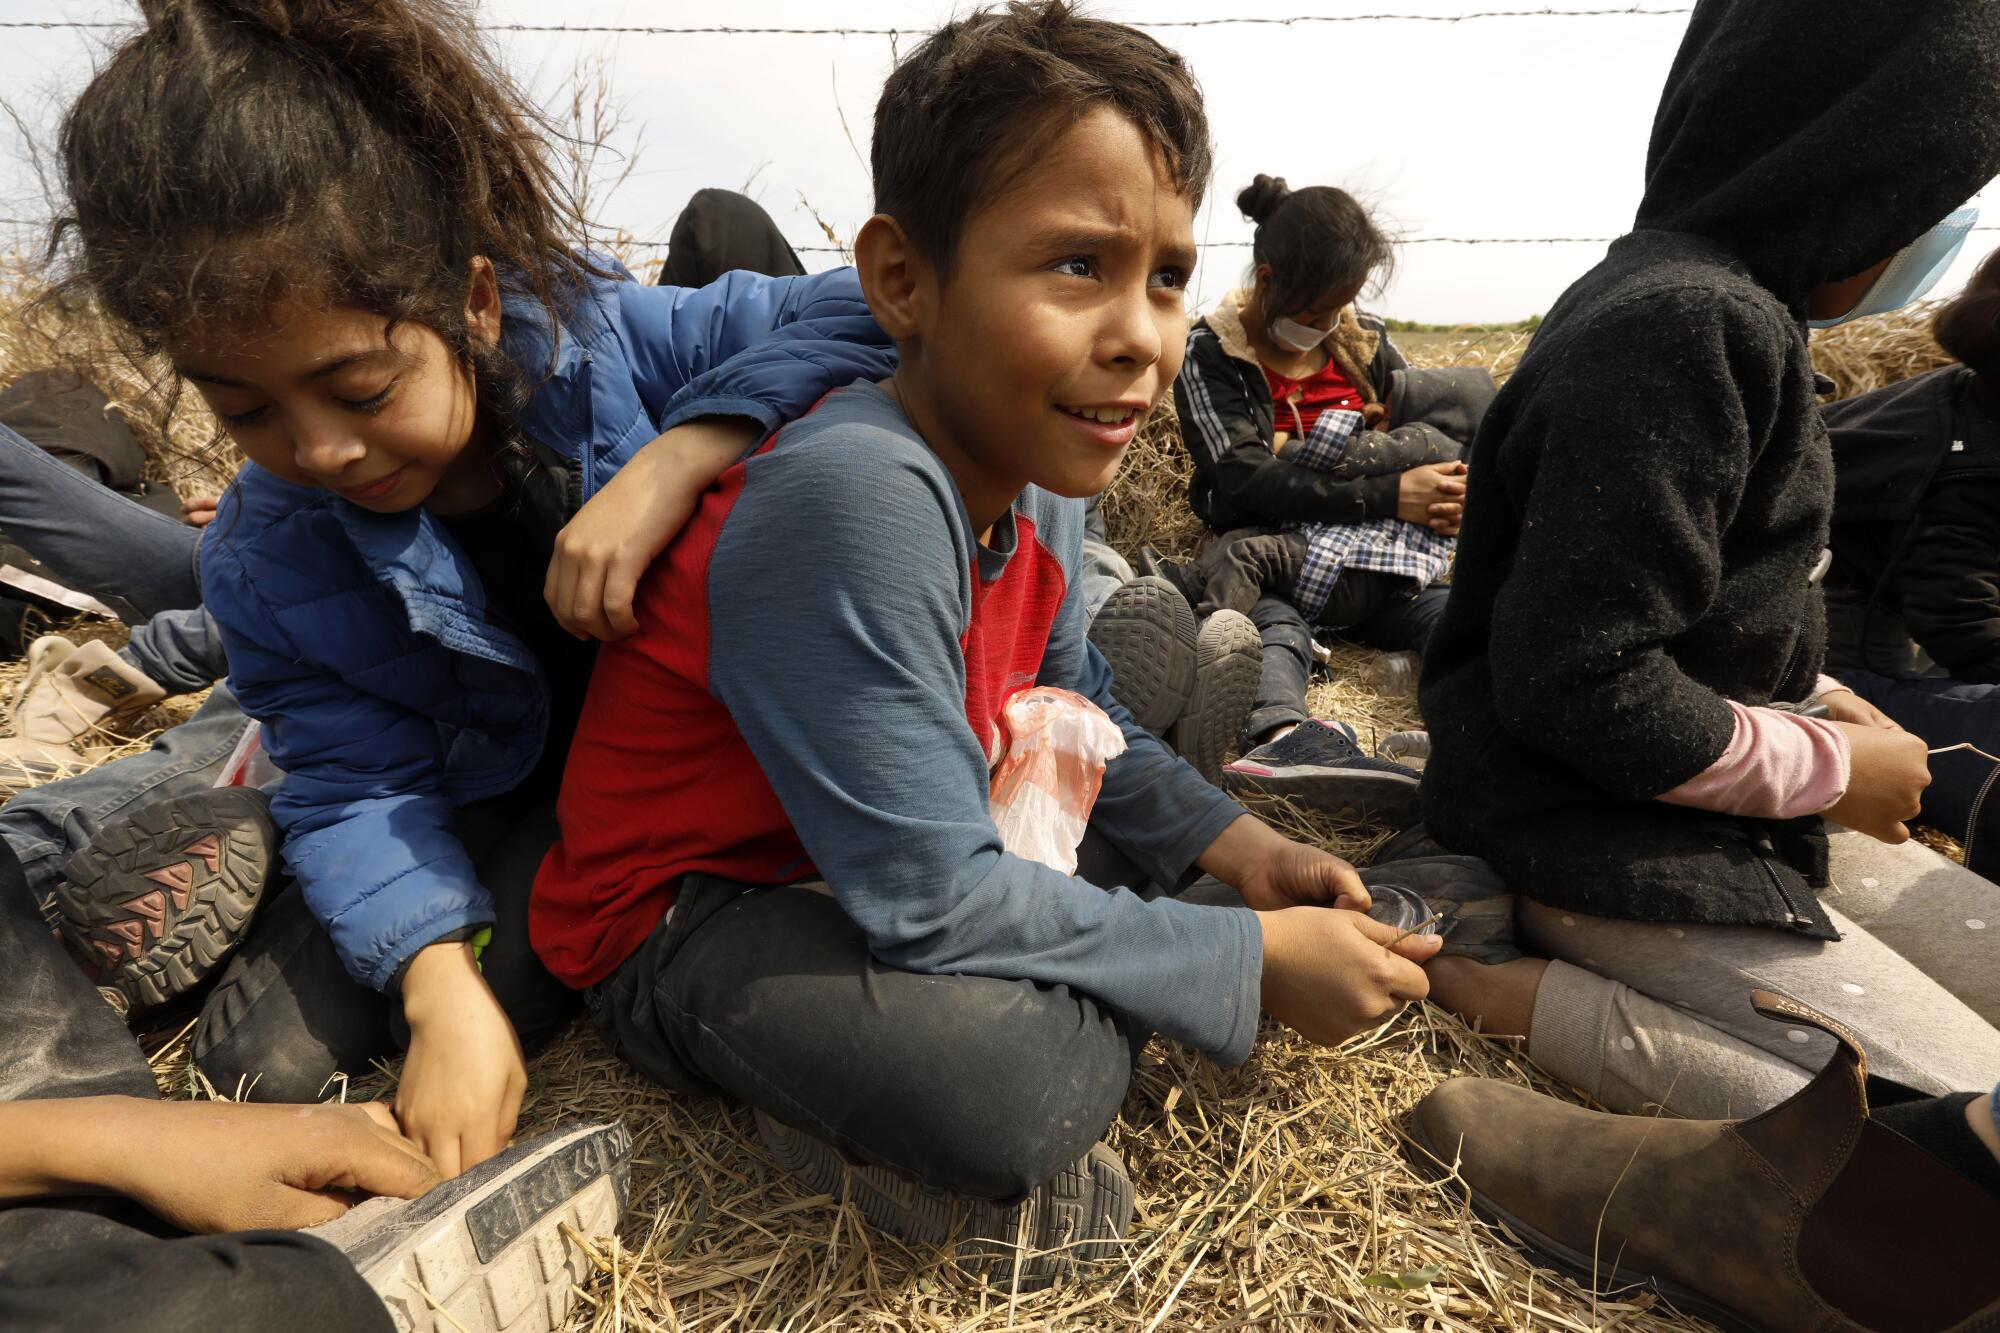 Christopher Garcia, 10, center, sits with fellow Central American migrants in Texas' Rio Grande Valley.